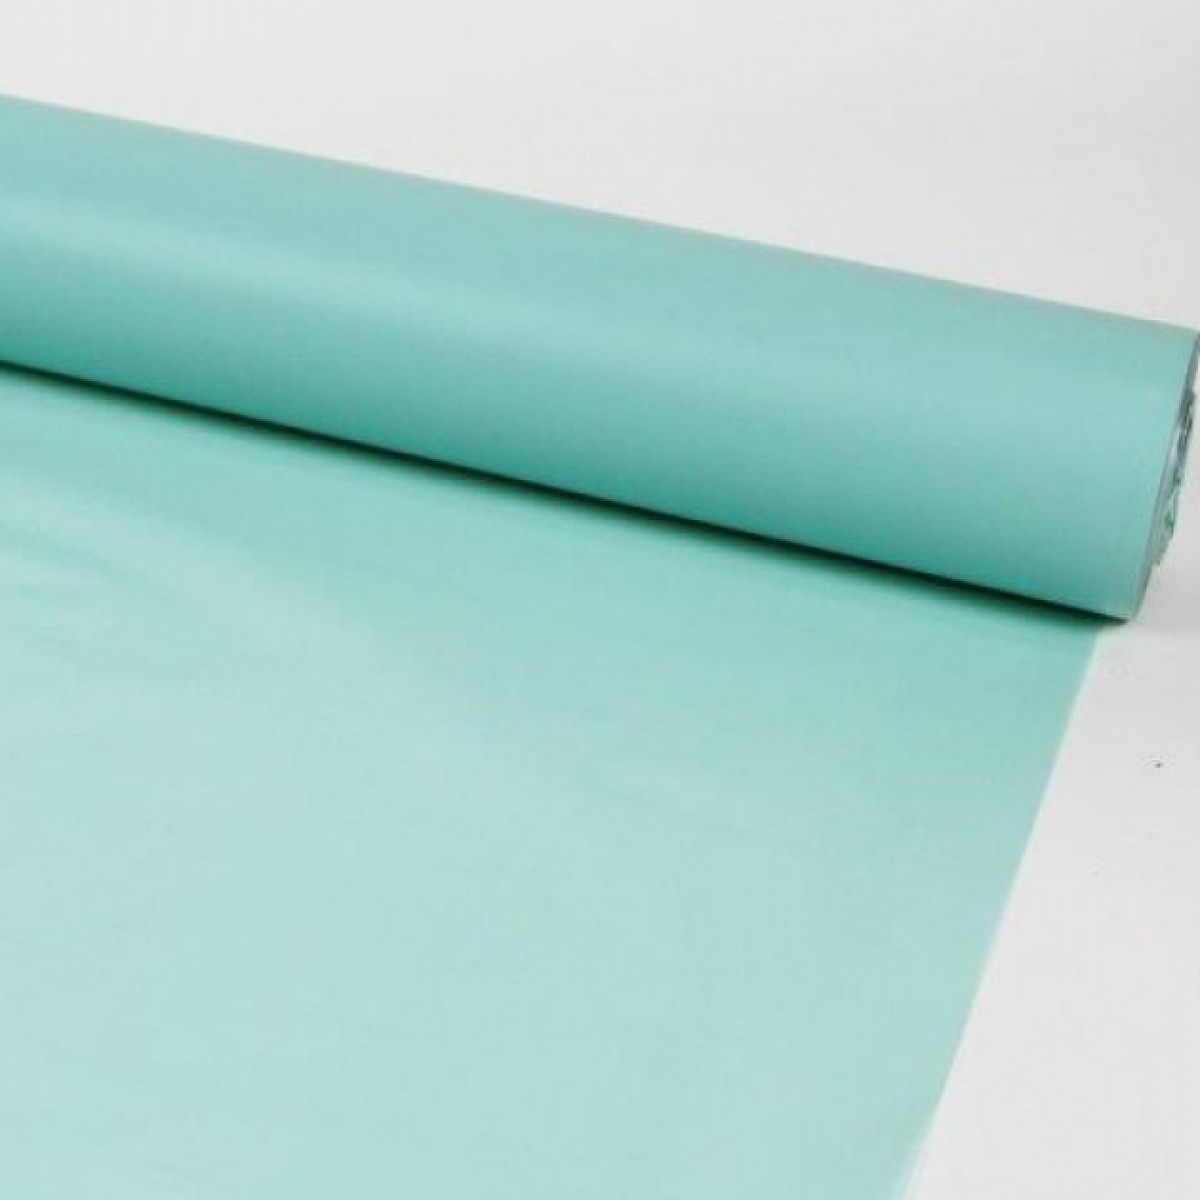 7044 Frosted Duck Egg Blue 80cmx25m 50mic Film - 1 Roll